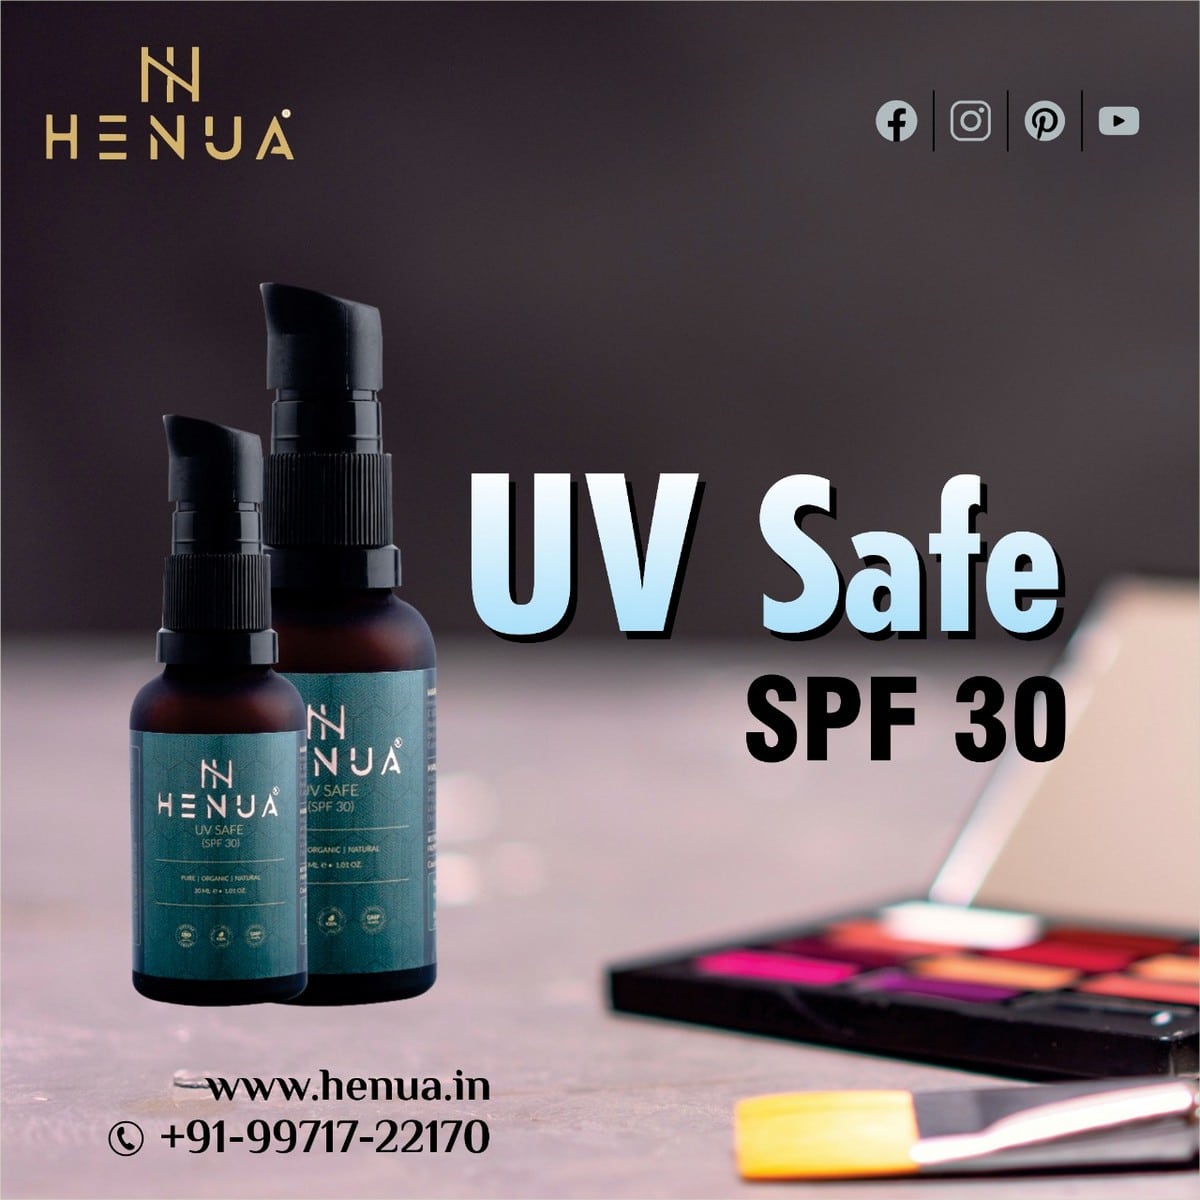 Ultimate Protection from UV Rays